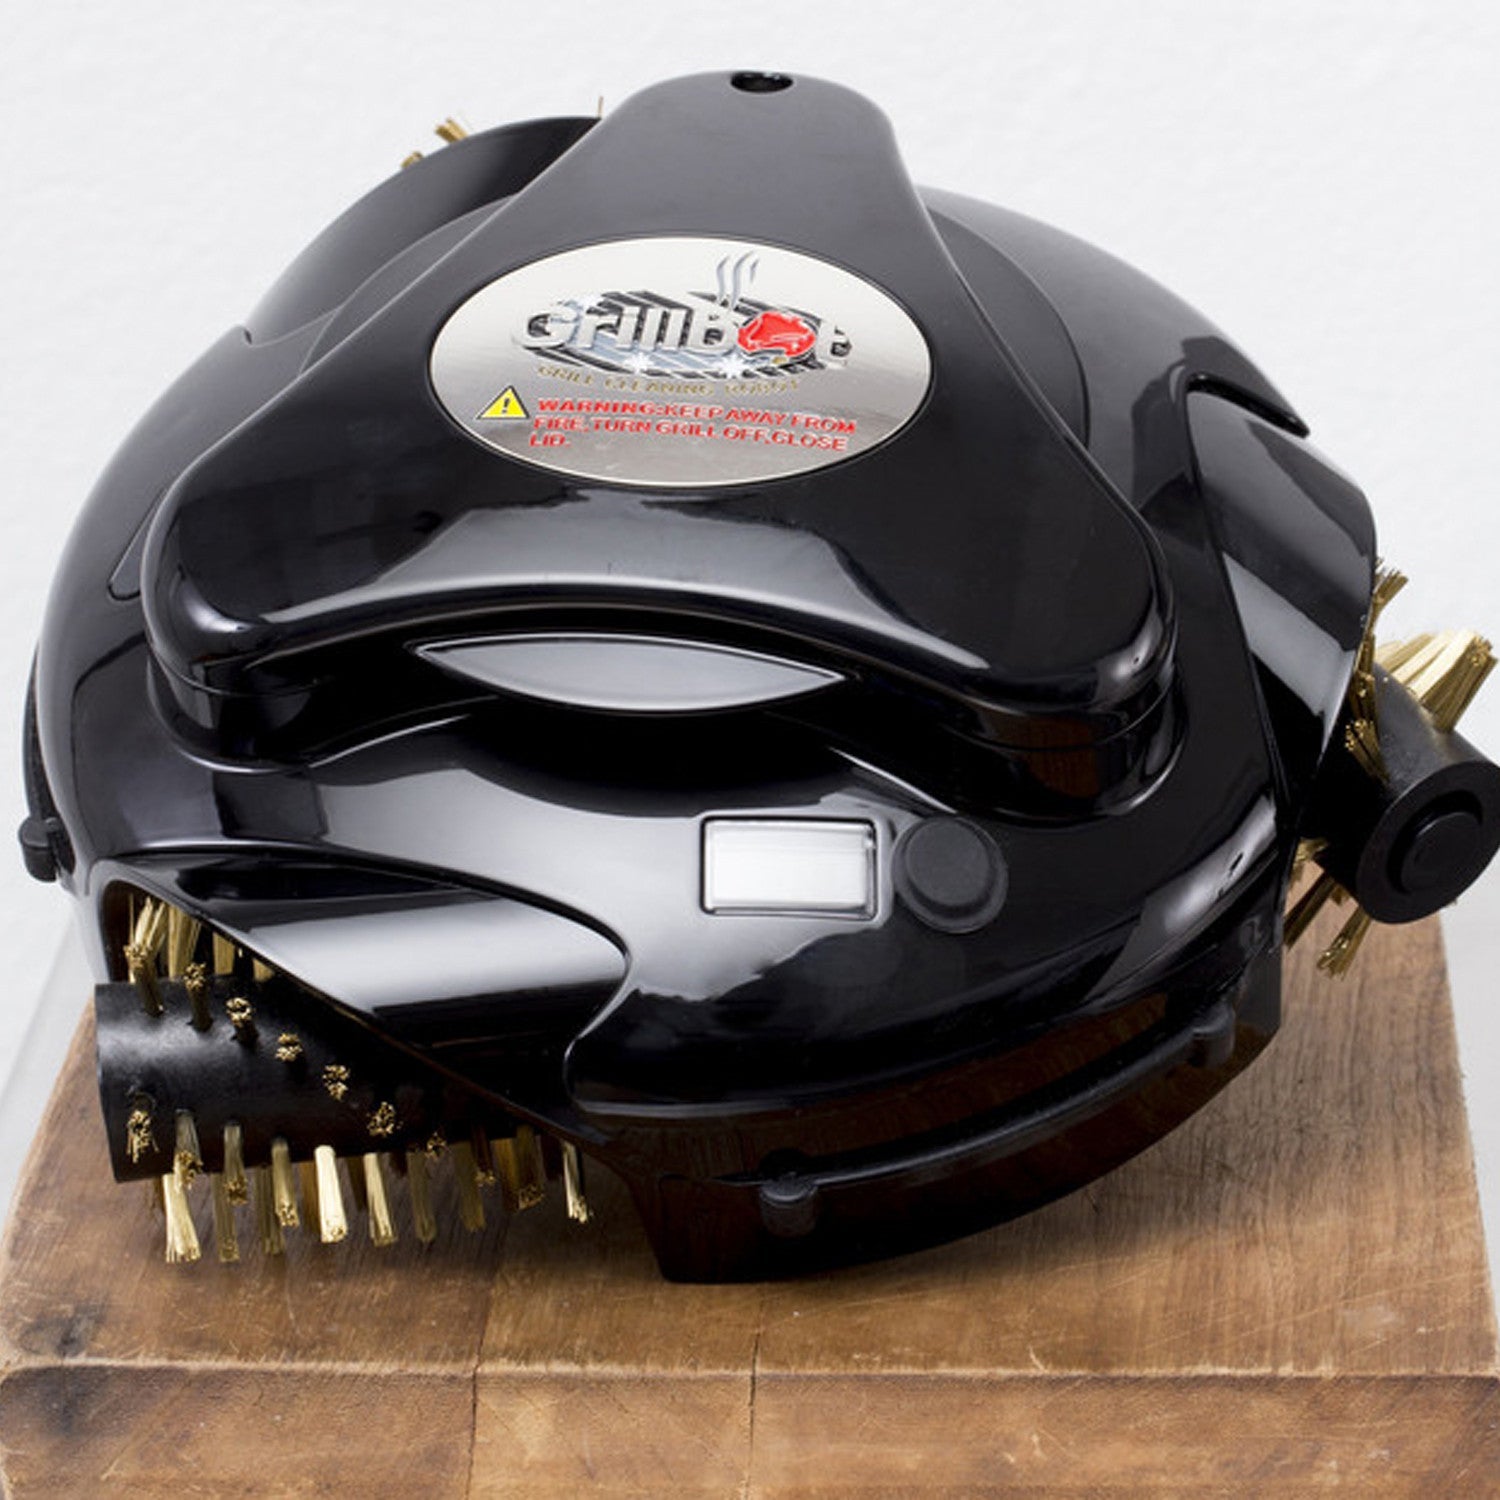  Customer reviews: Grillbot Automatic Grill Cleaning Robot  (Black Grillbot + Carry Case, Grillbot Bundle)